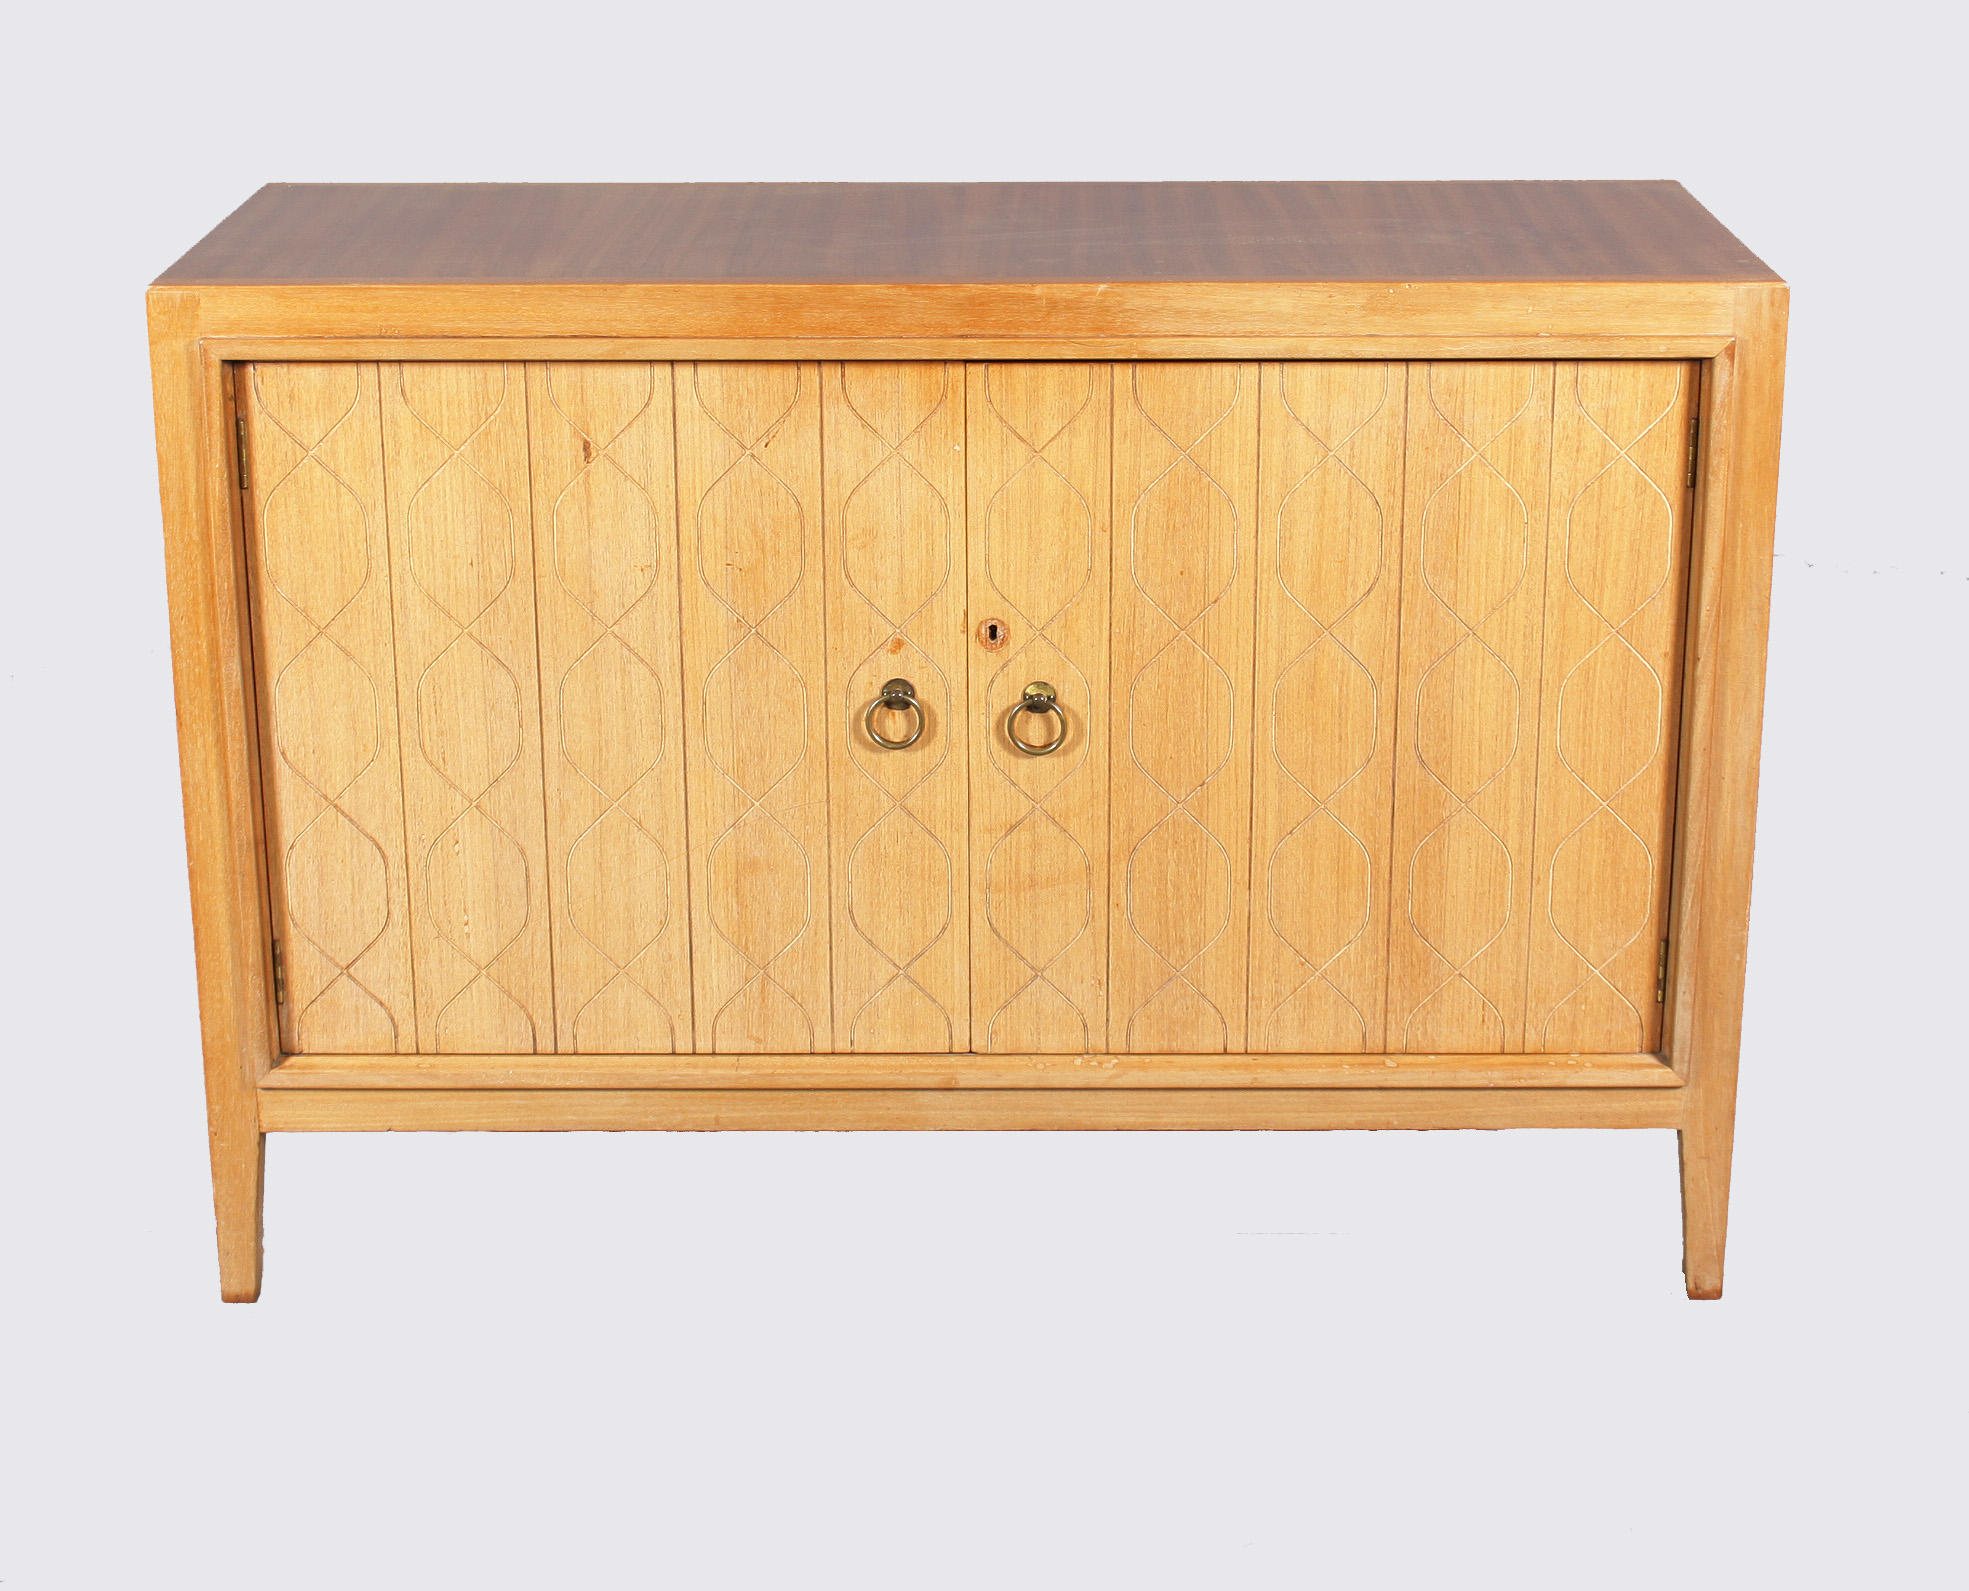 A Gordon Russell double helix mahogany sideboard, designed by David Booth...